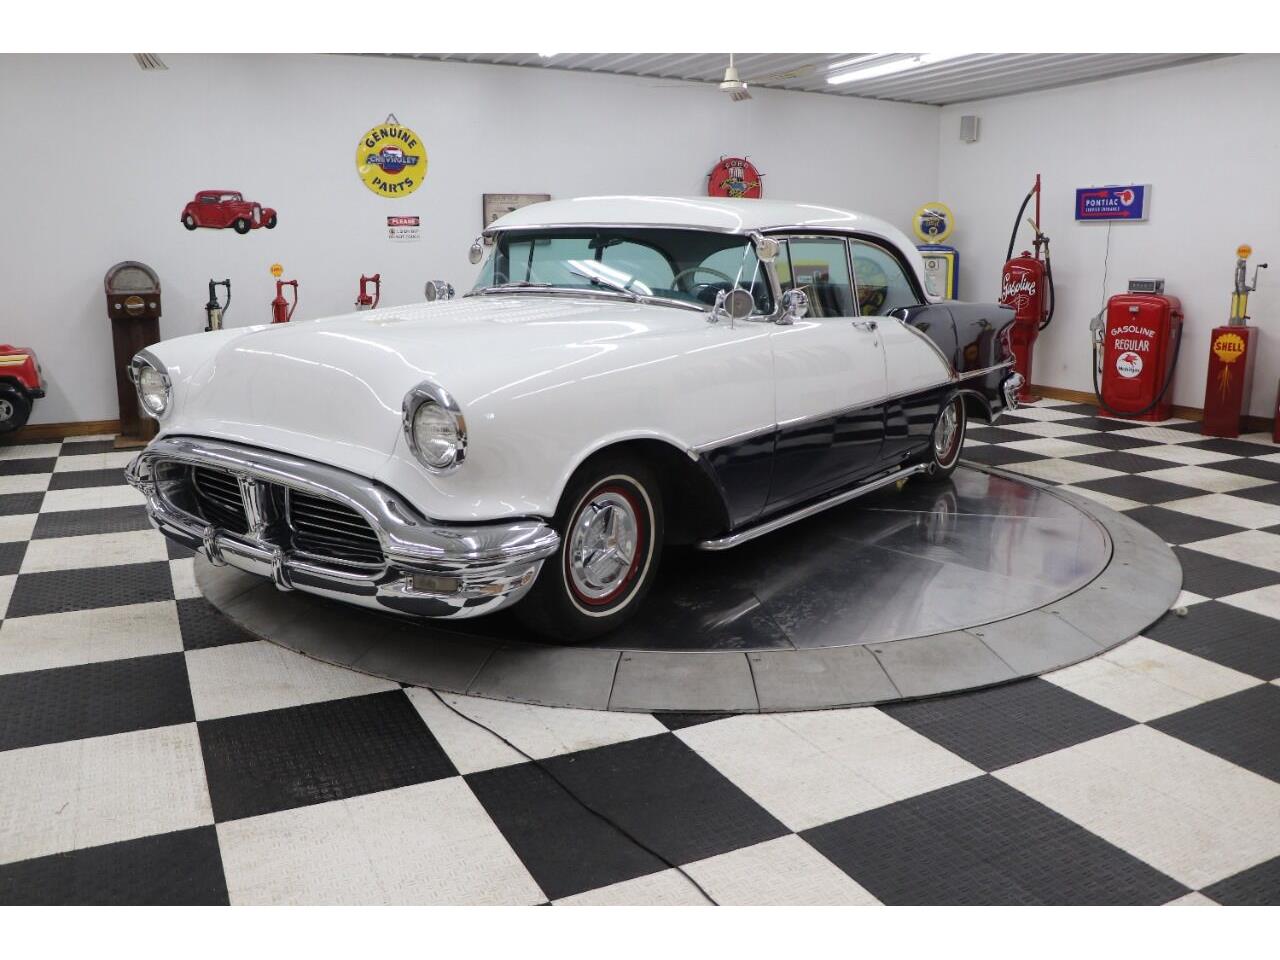 For Sale: 1956 Oldsmobile 88 in Clarence, Iowa for sale in Clarence, IA